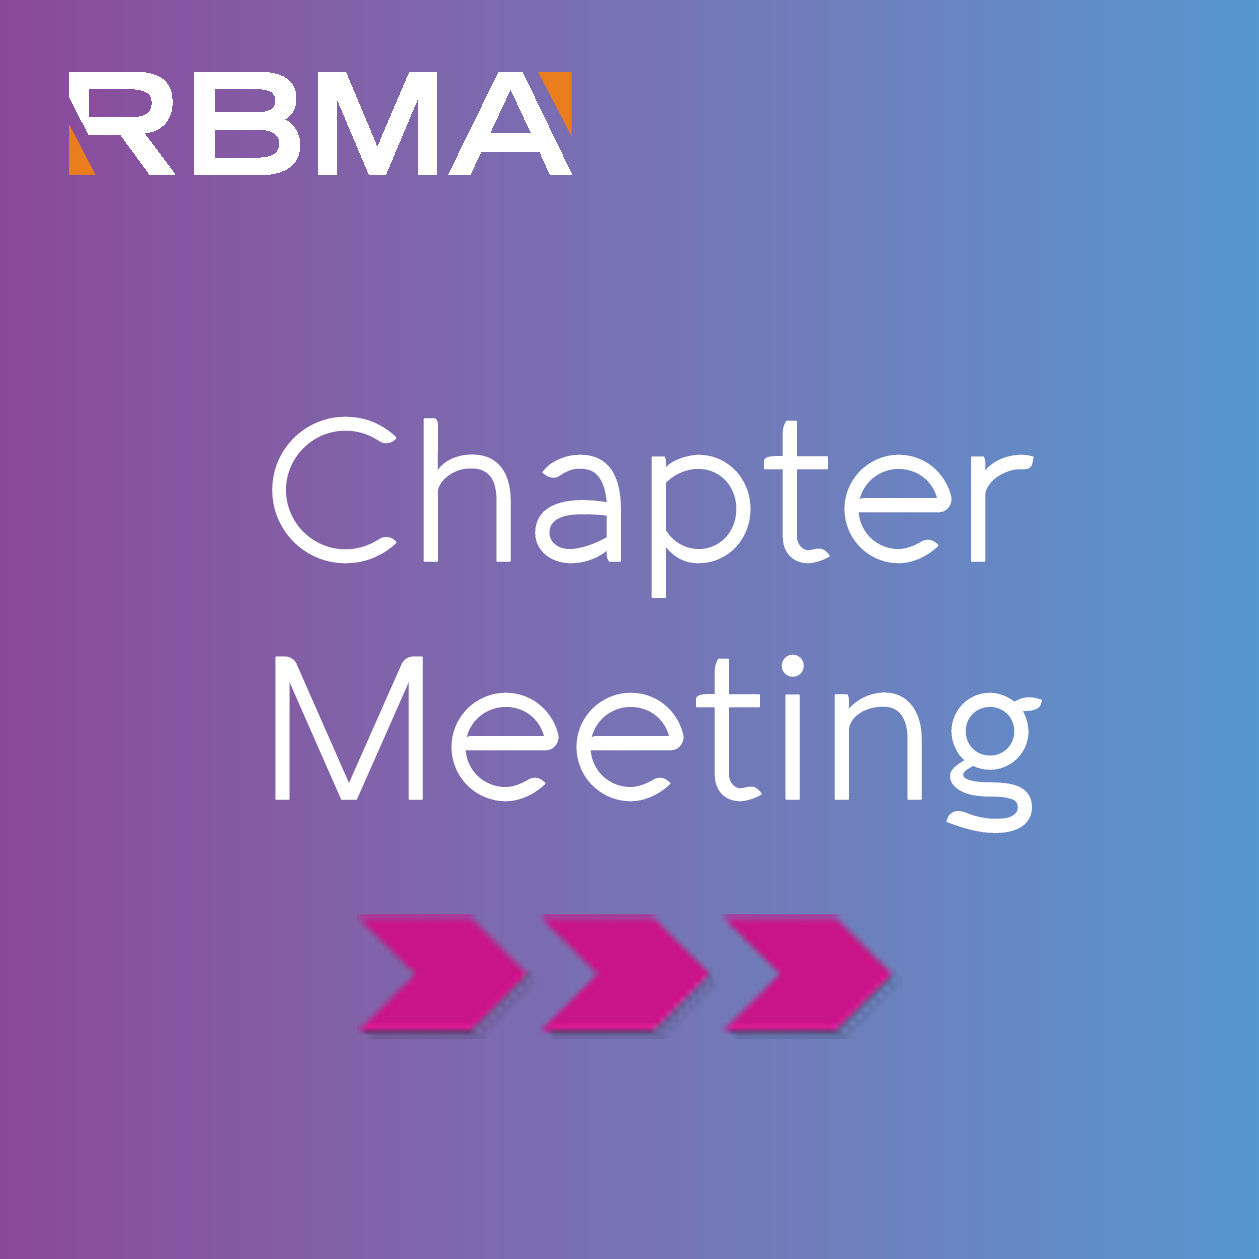 RBMA Northeast Chapter Annual Meeting